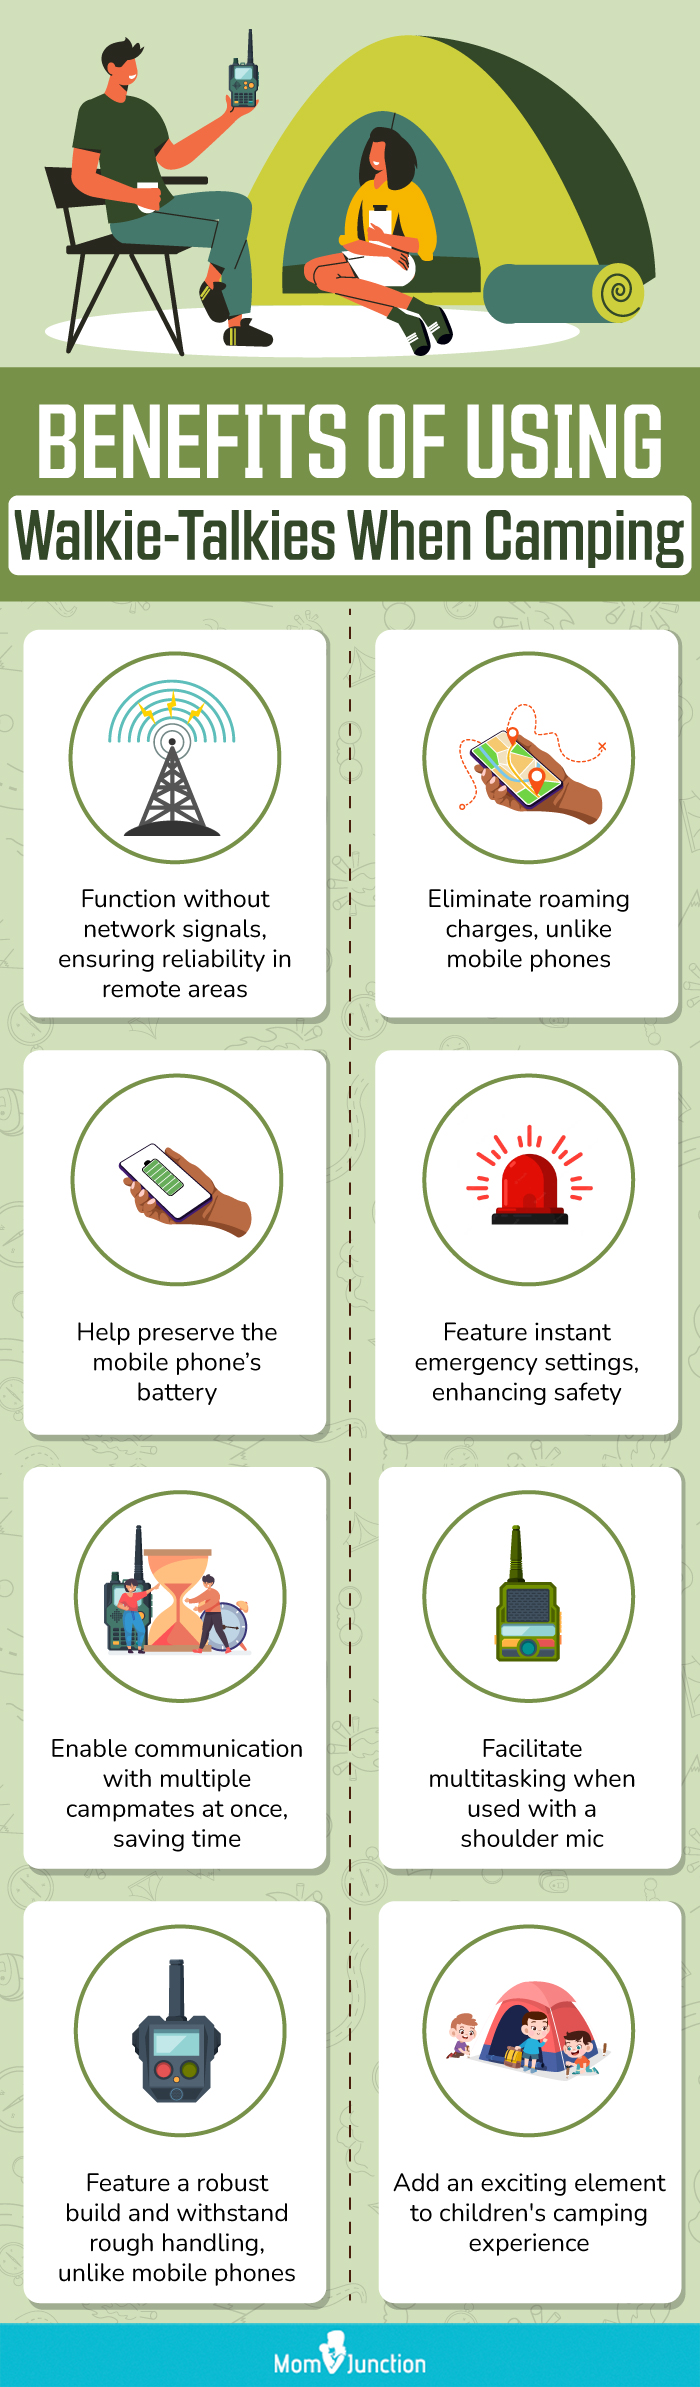 Benefits Of Using Walkie Talkies When Camping (infographic)